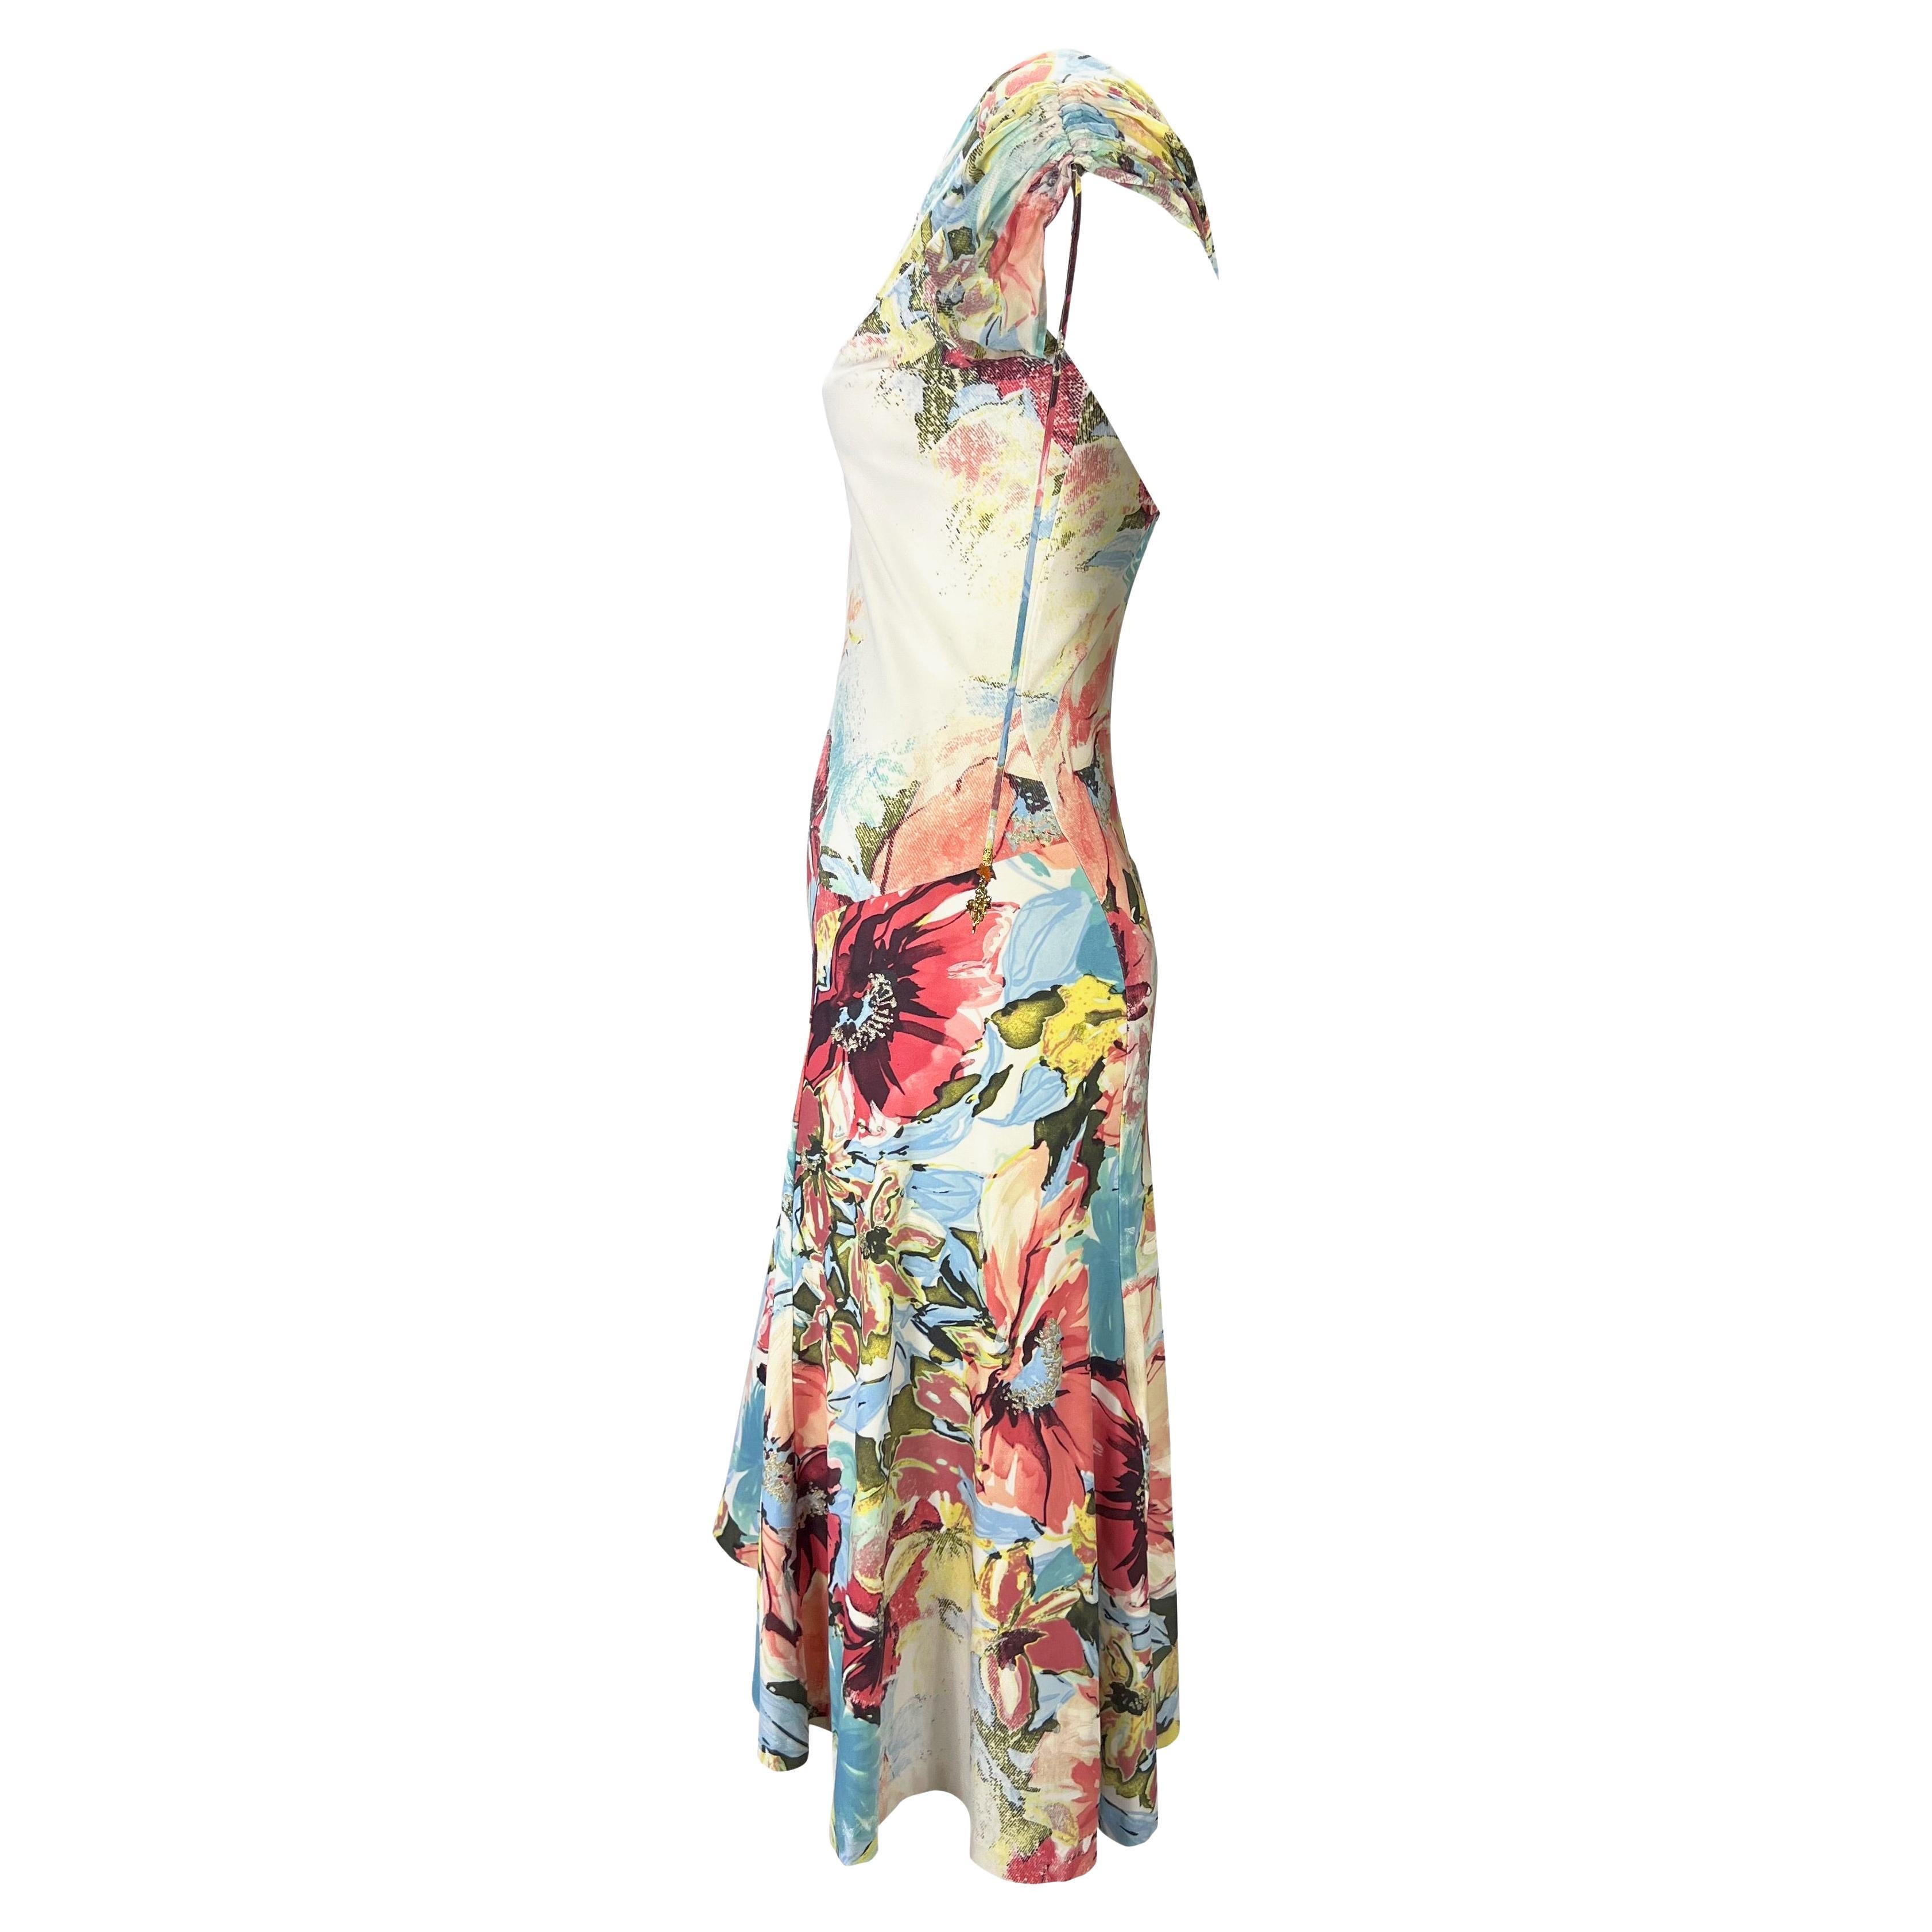 S/S 2003 Roberto Cavalli Floral Abstract Watercolor Viscose Stretch Charm Dress In Good Condition For Sale In West Hollywood, CA